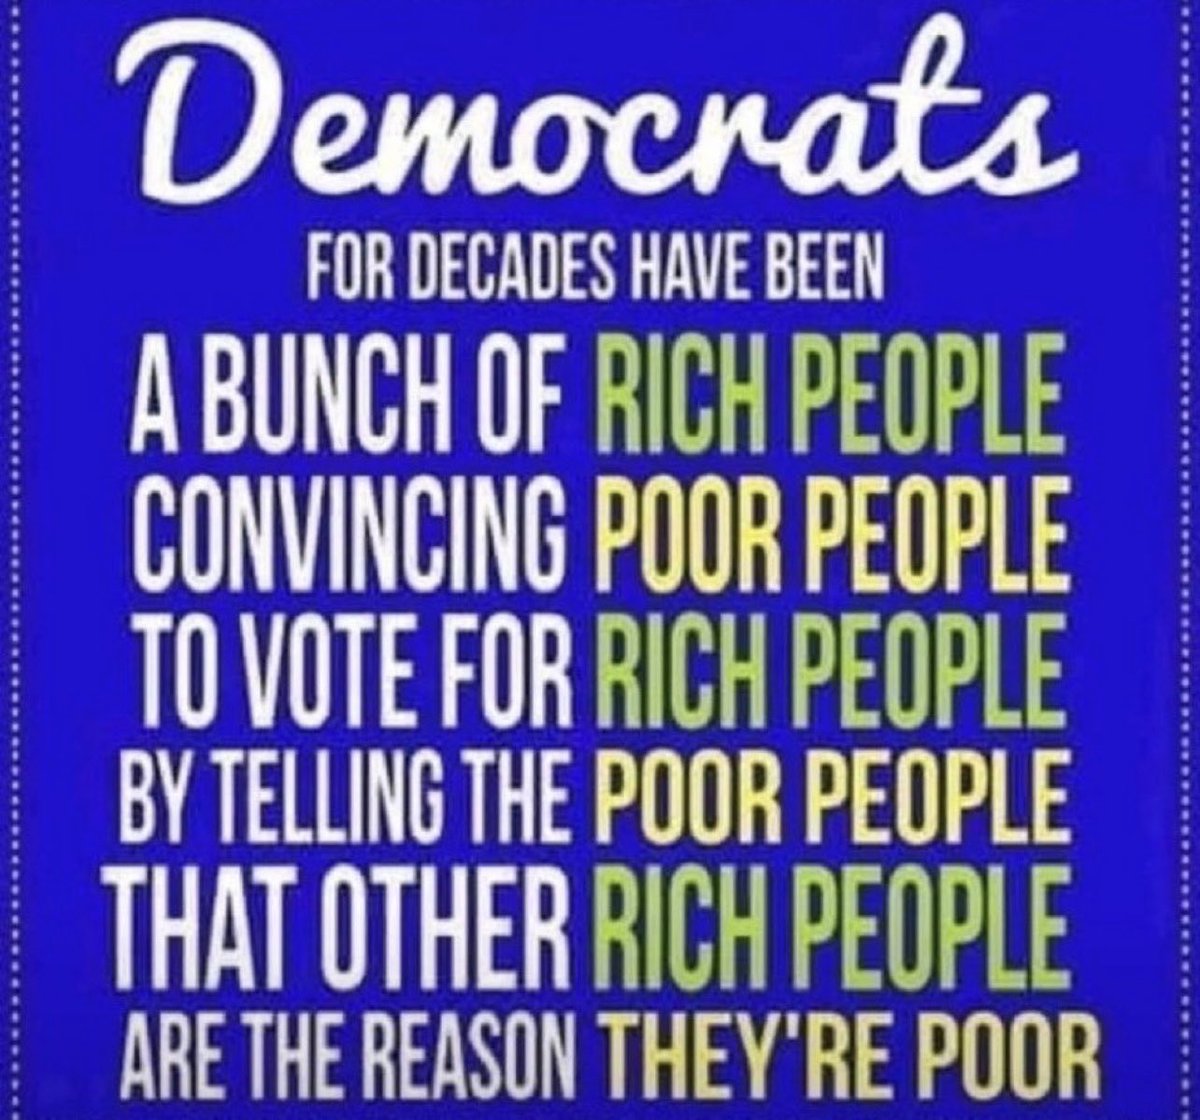 Ain’t this the truth 🎯 #Democrats